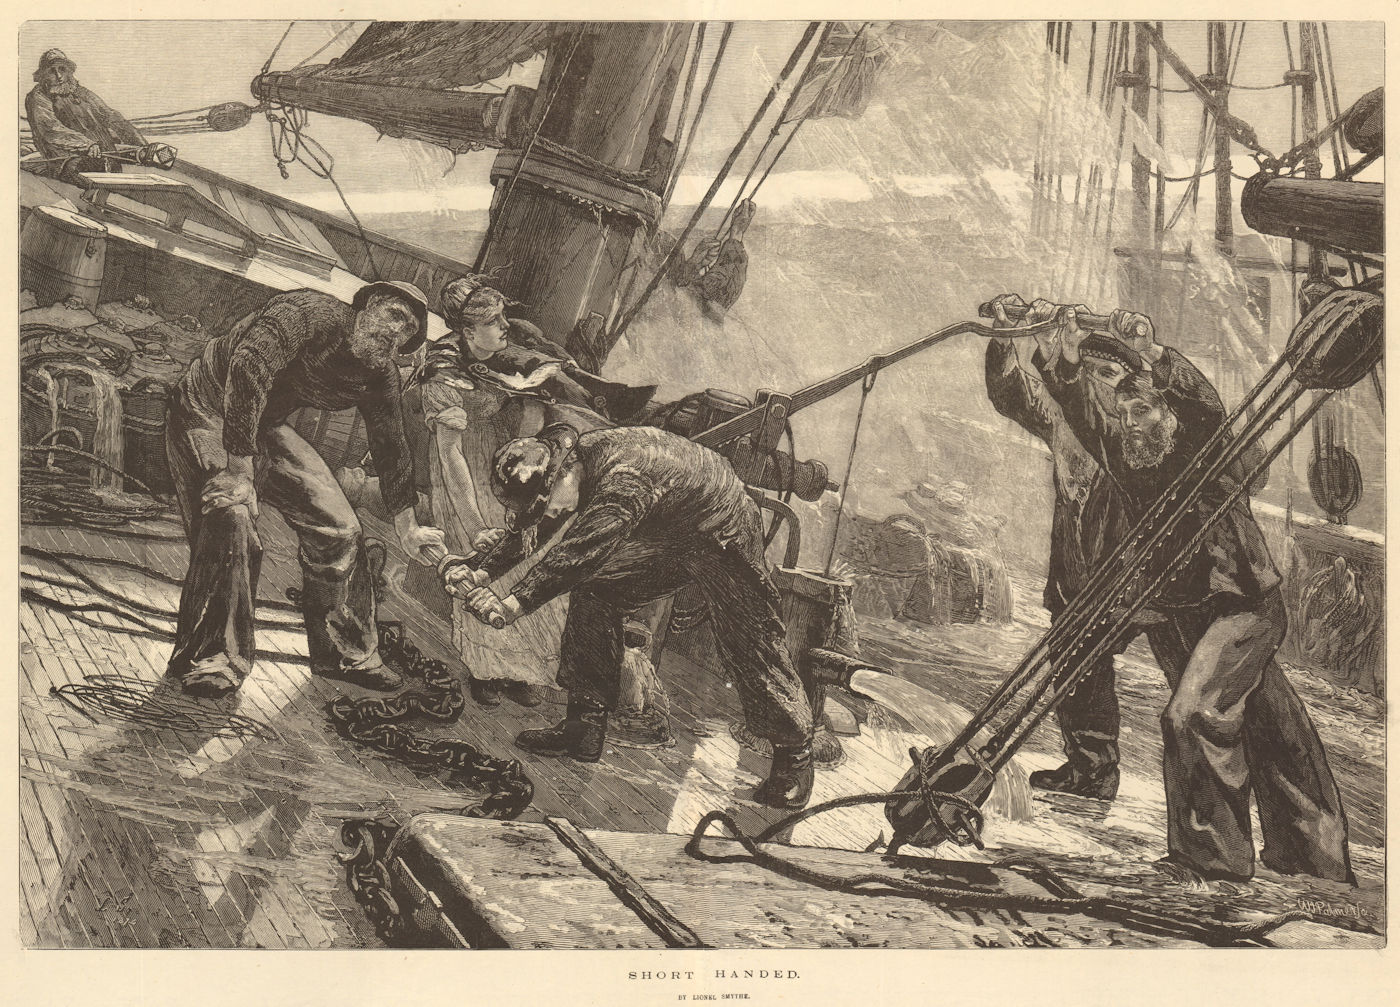 Associate Product "Short handed", by Lionel Smythe. Ship in a storm 1874 antique ILN full page